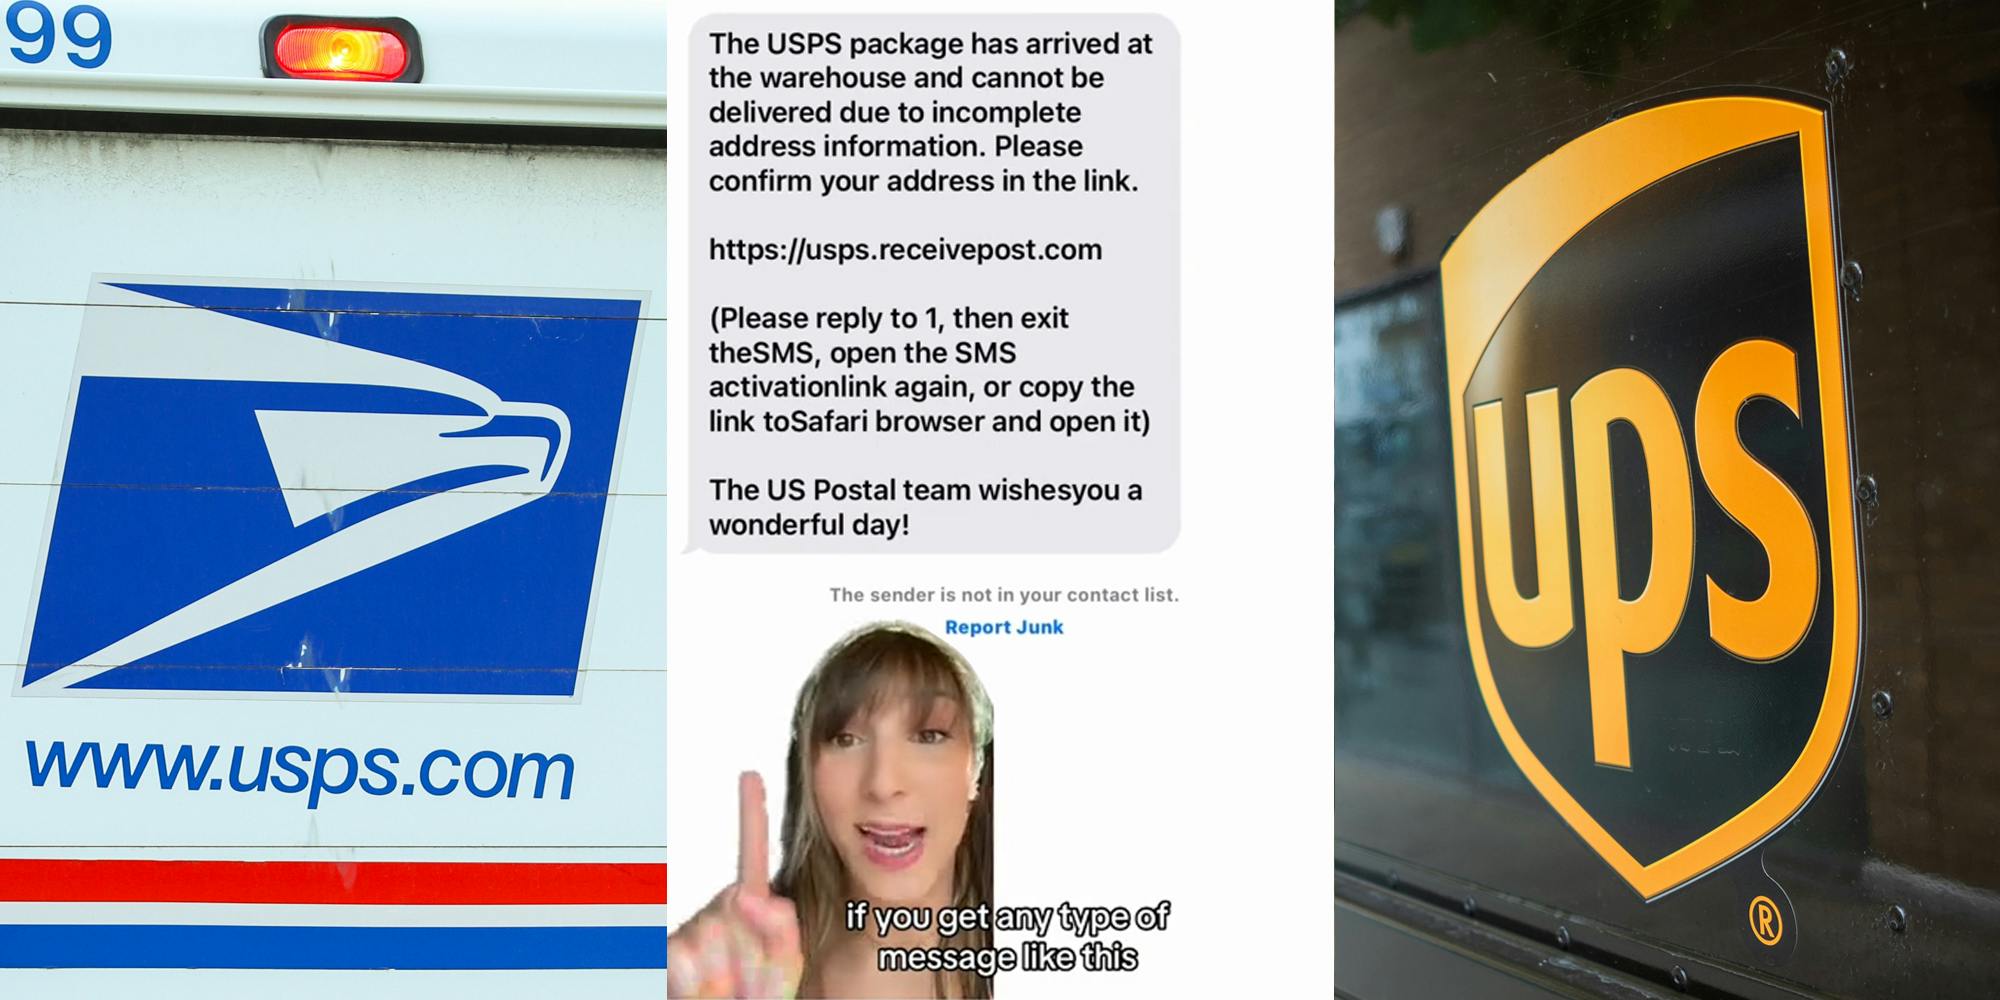 USPS logo on truck (l) woman greenscreen TikTok over USPS message with caption "if you get any type of message like this" (c) UPS logo on truck (r)